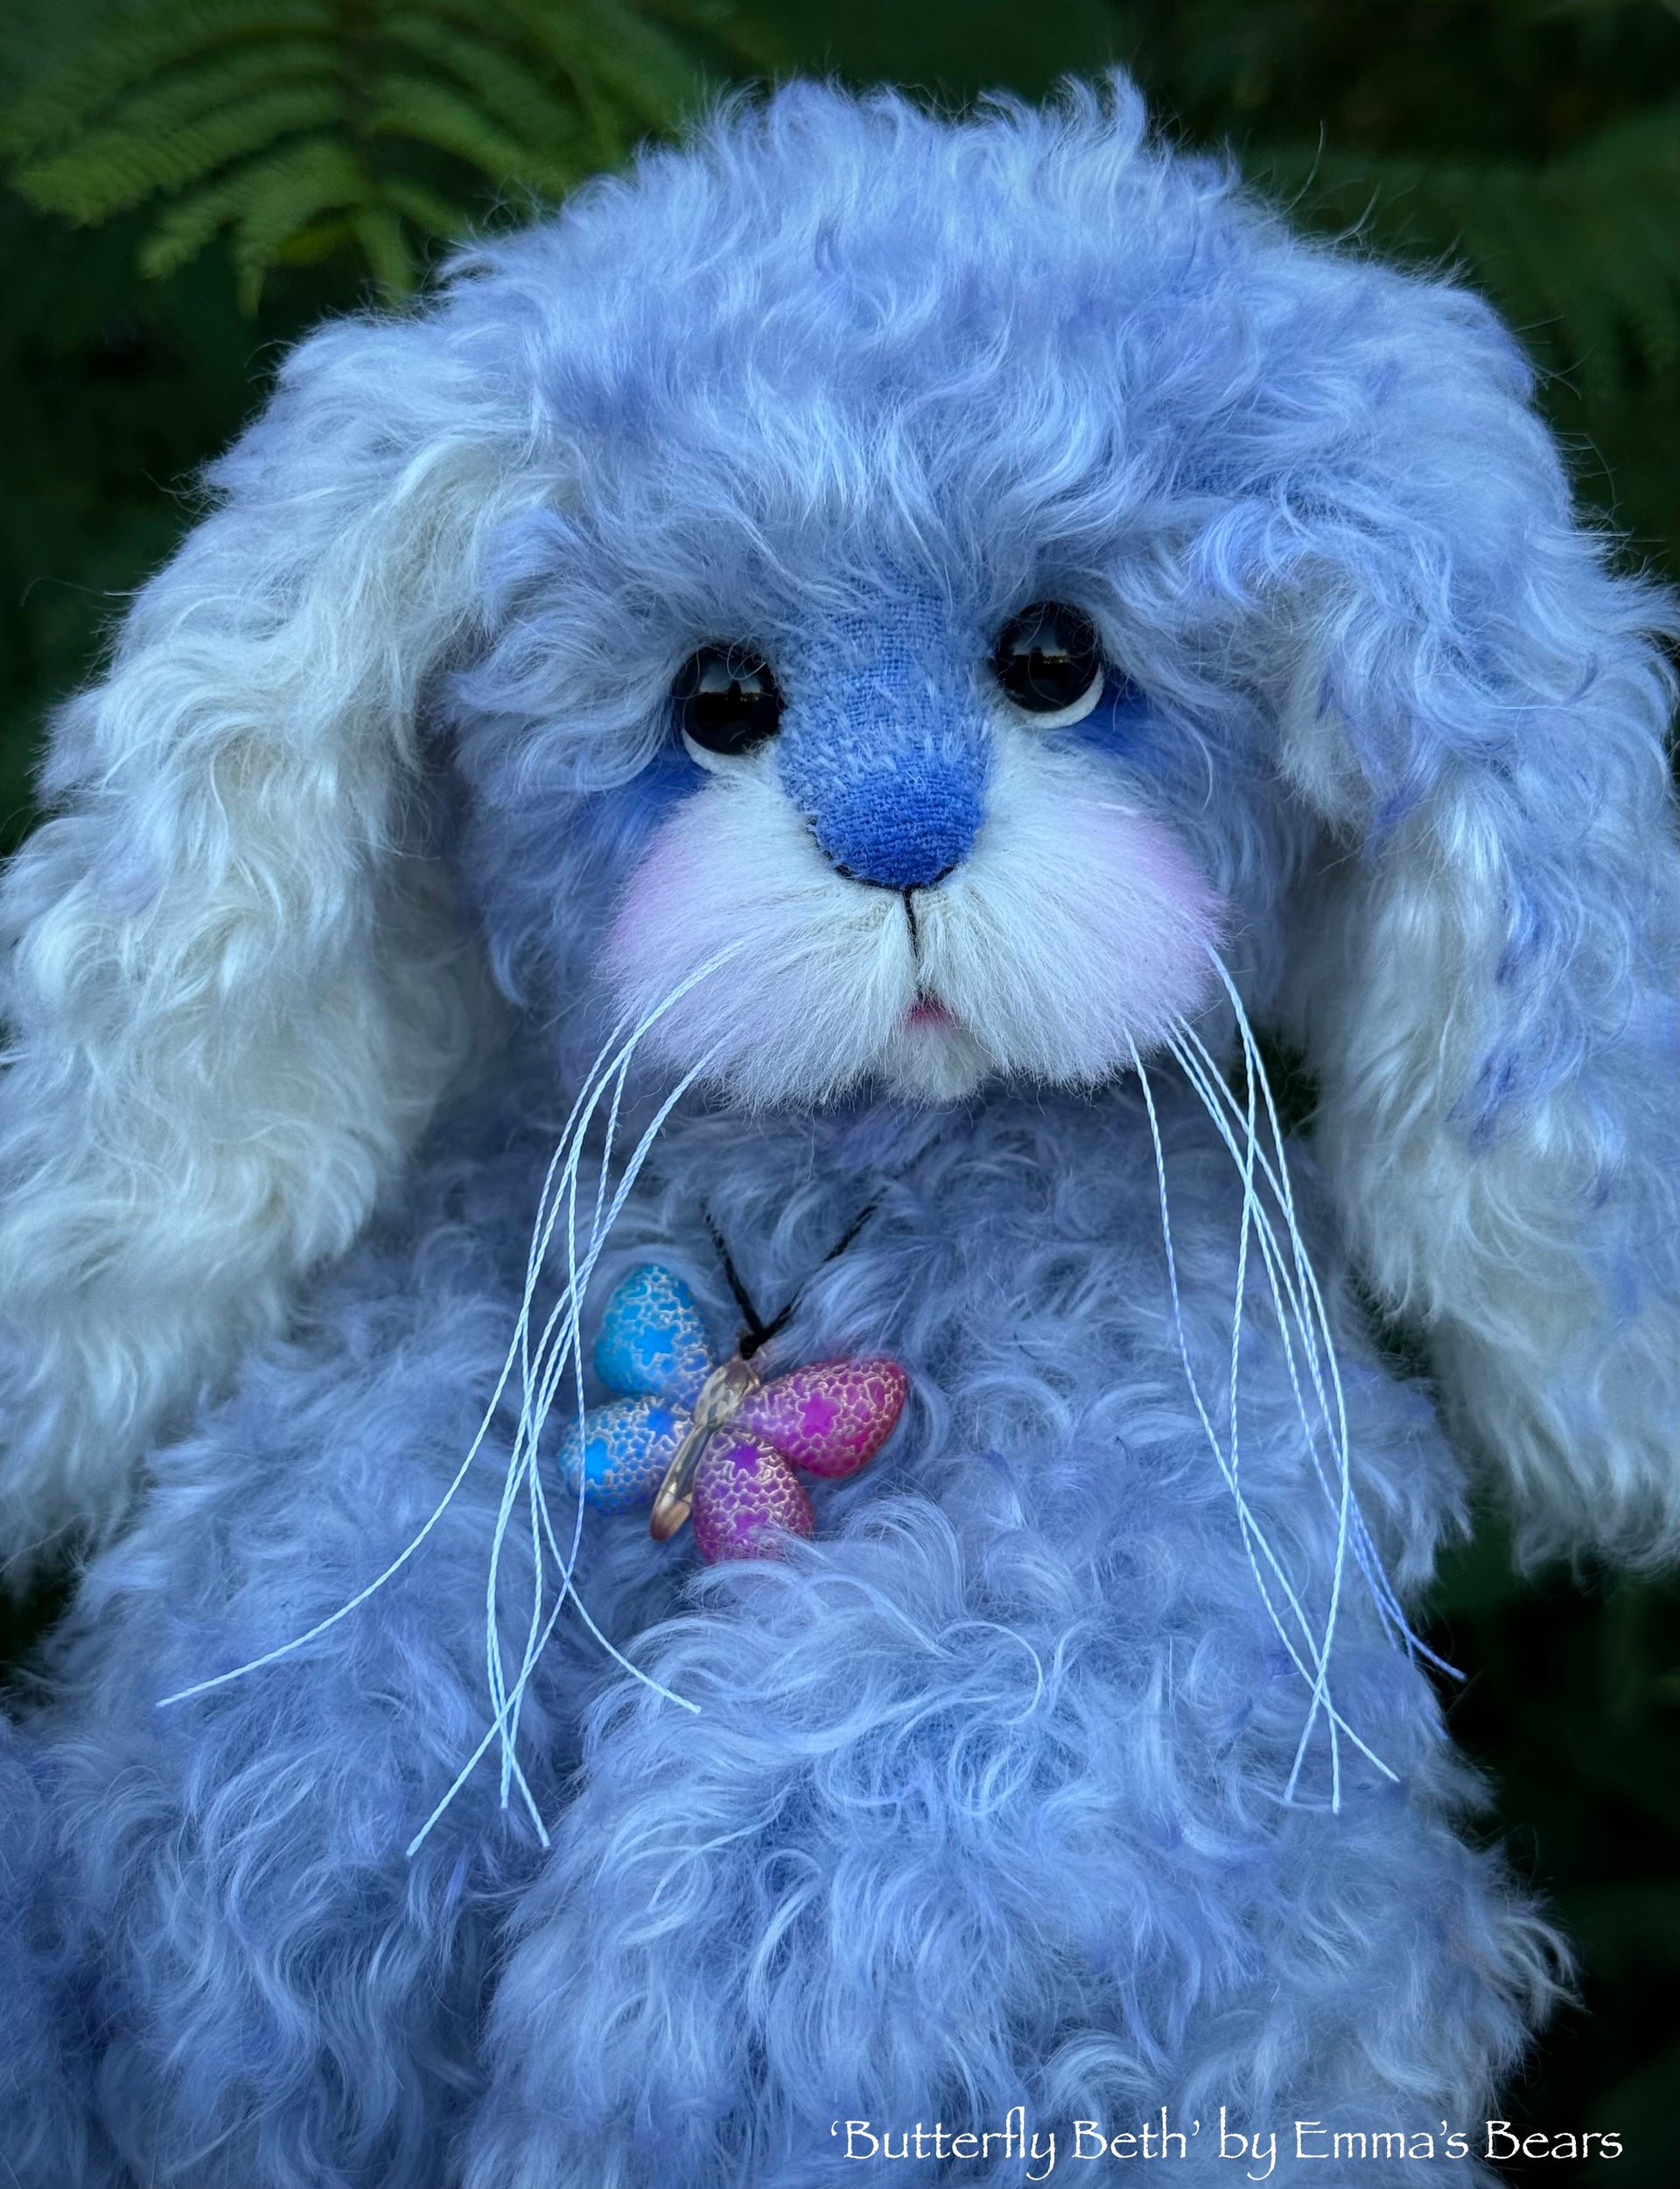 Butterfly Beth - 12" Hand-Dyed Kid Mohair EASTER Bunny by Emma's Bears - OOAK